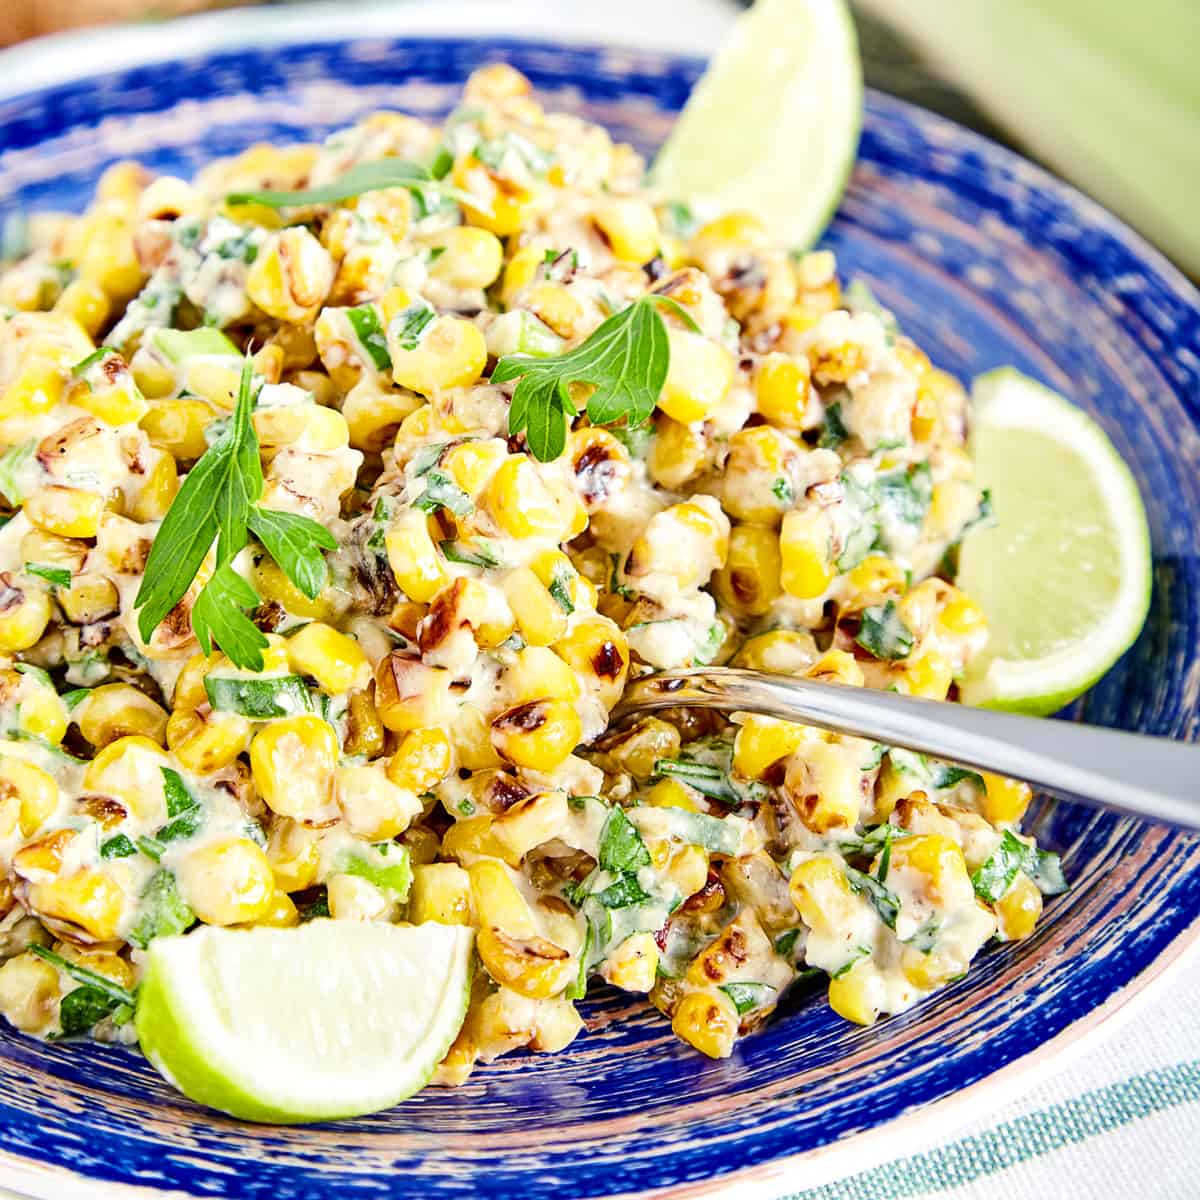 mexican corn salad recipe street food cotija cheese feta crema sour cream roasted grilled peppers lime cilantro